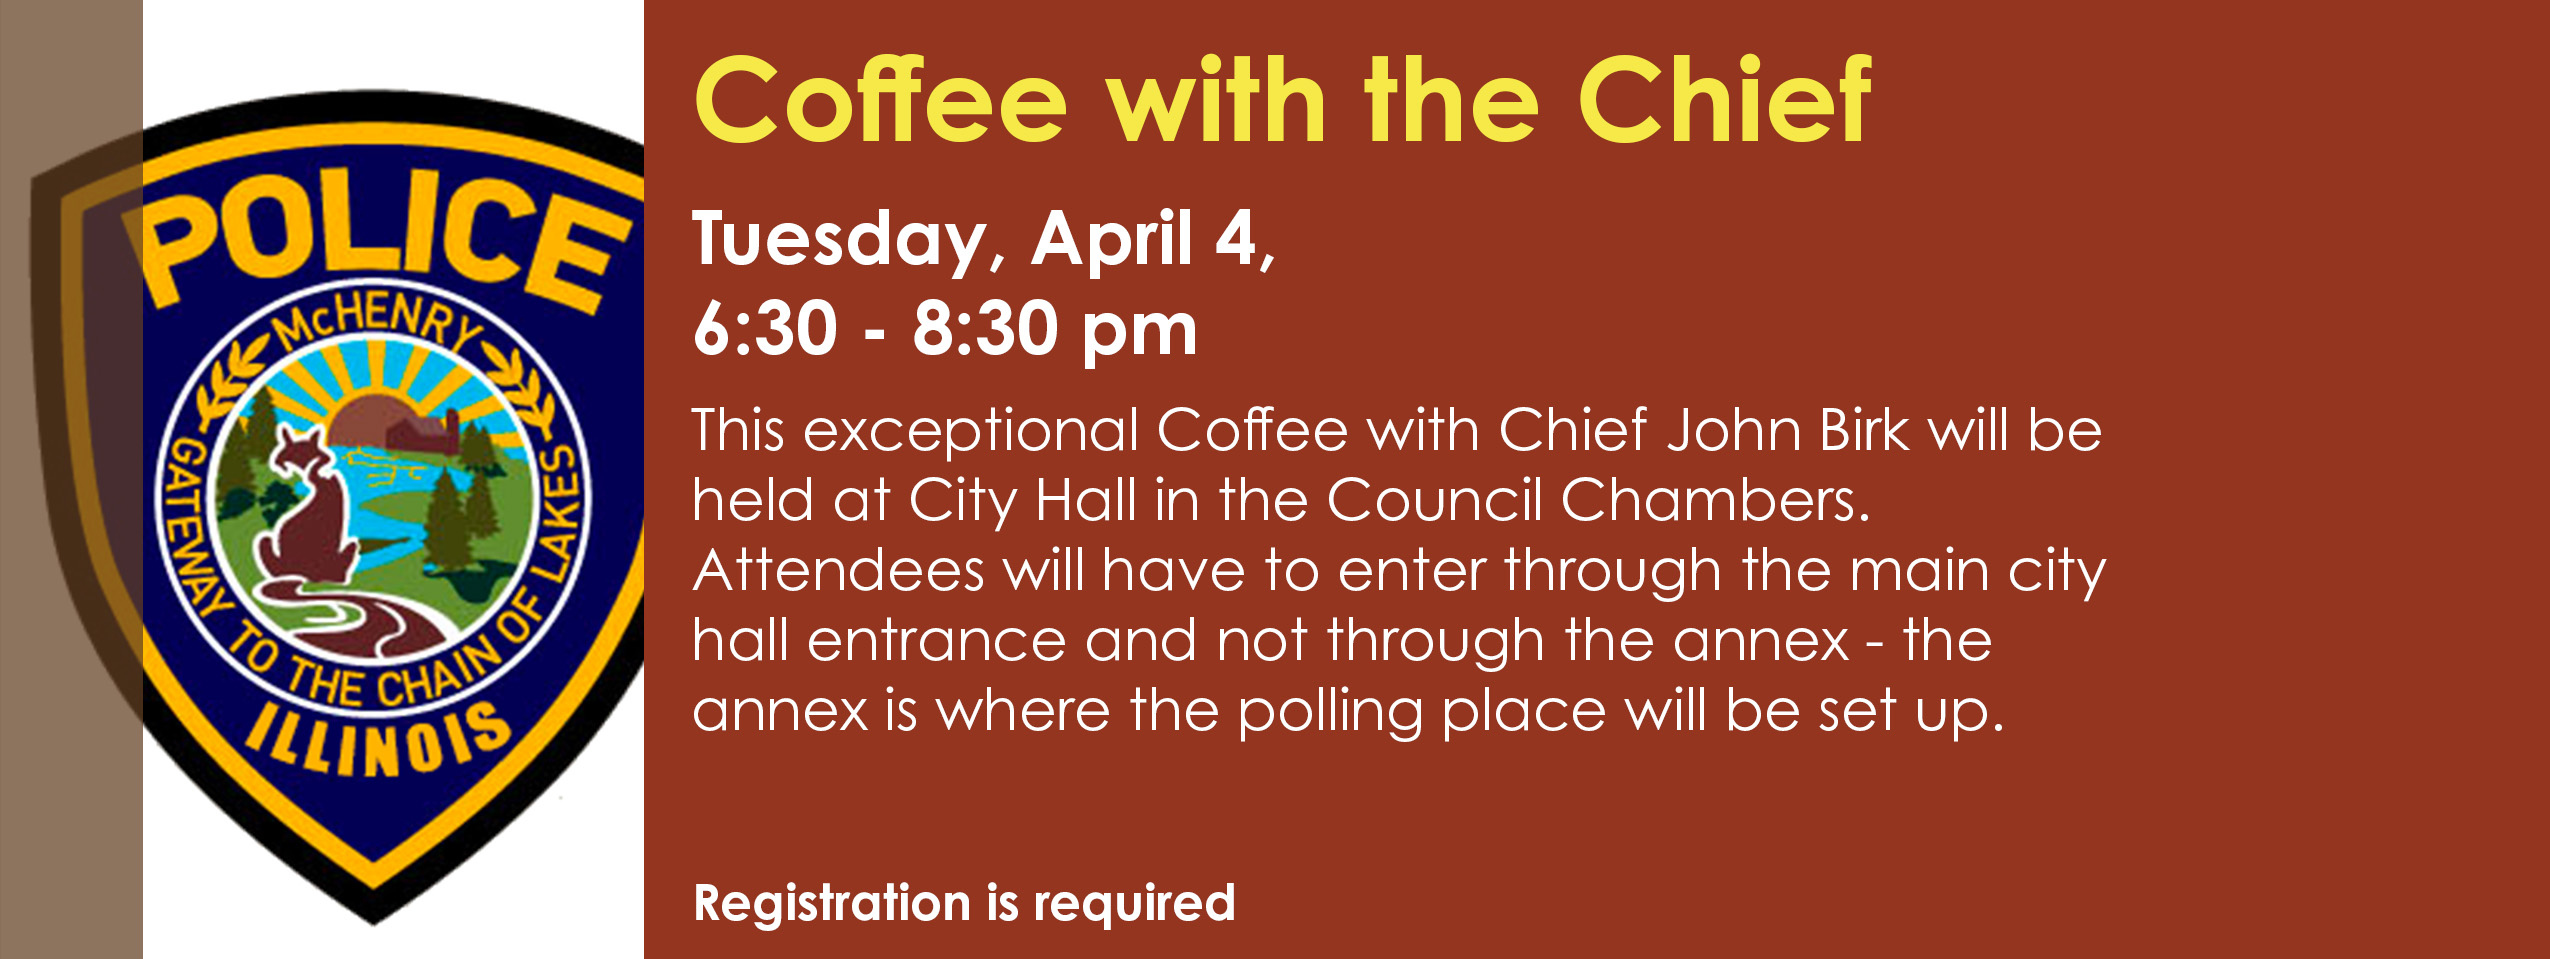 Coffee with the Chief April 4